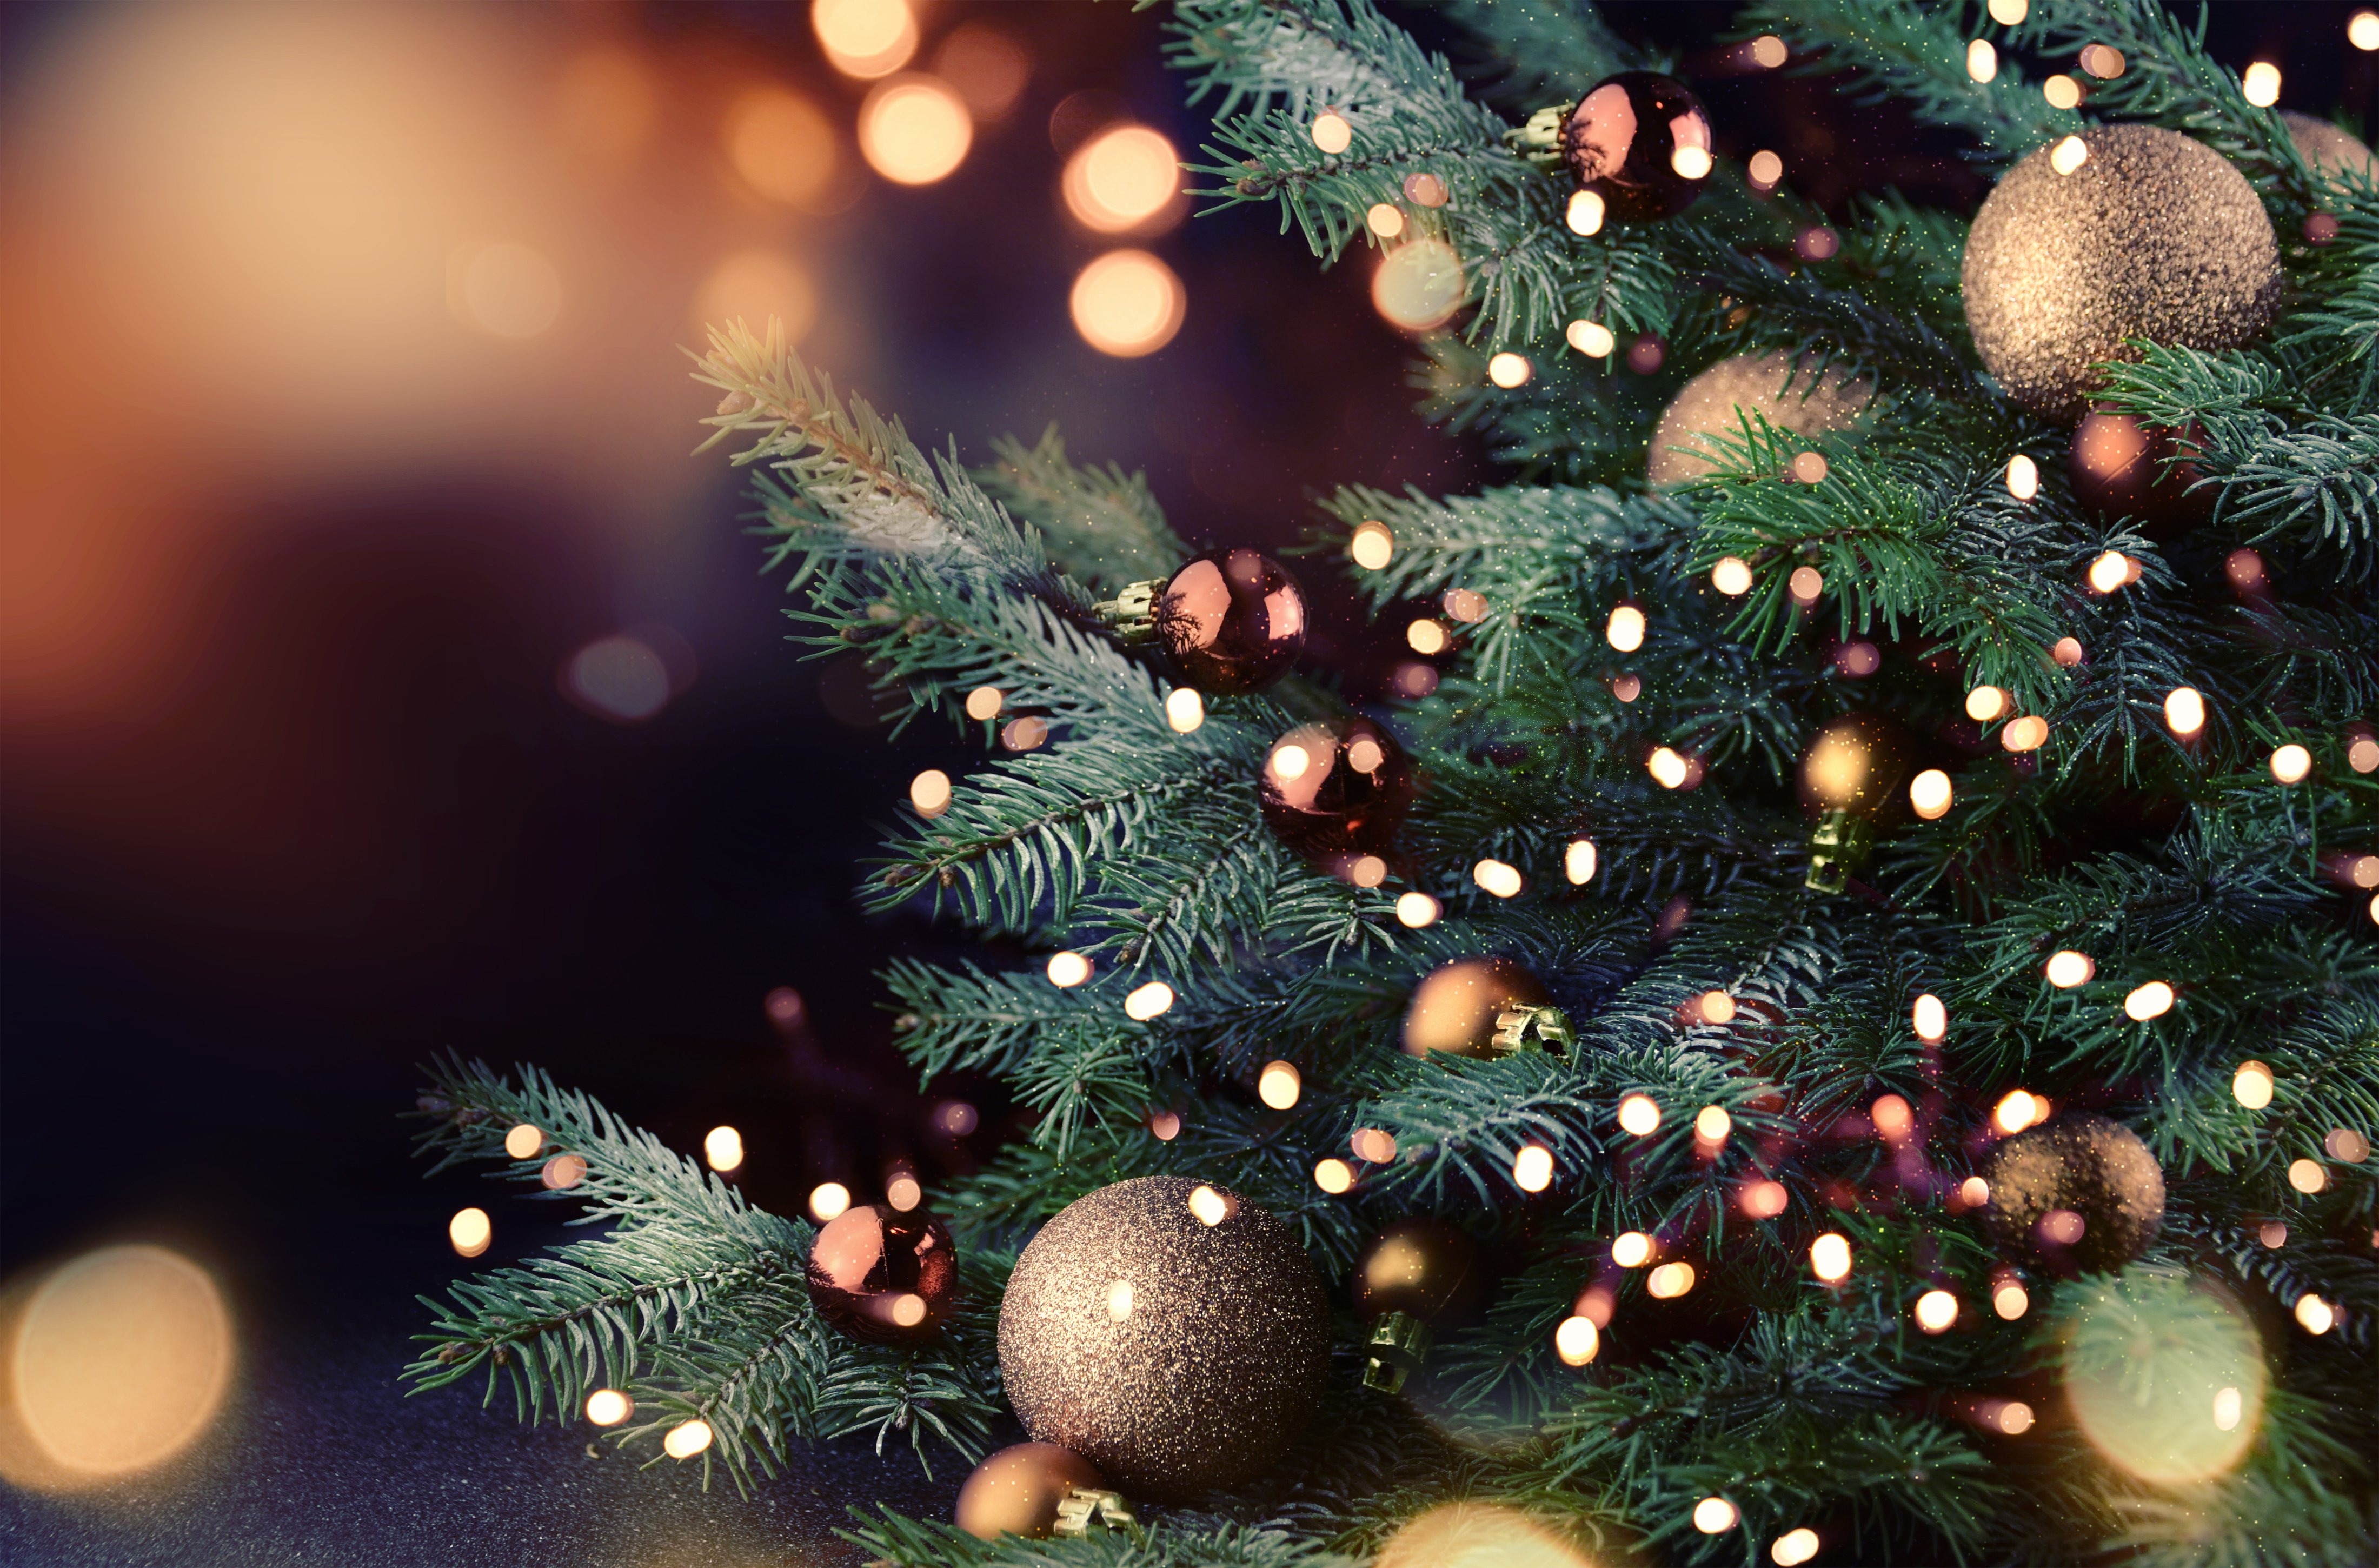 Christmas Tree with lights | Photo: Shutterstock